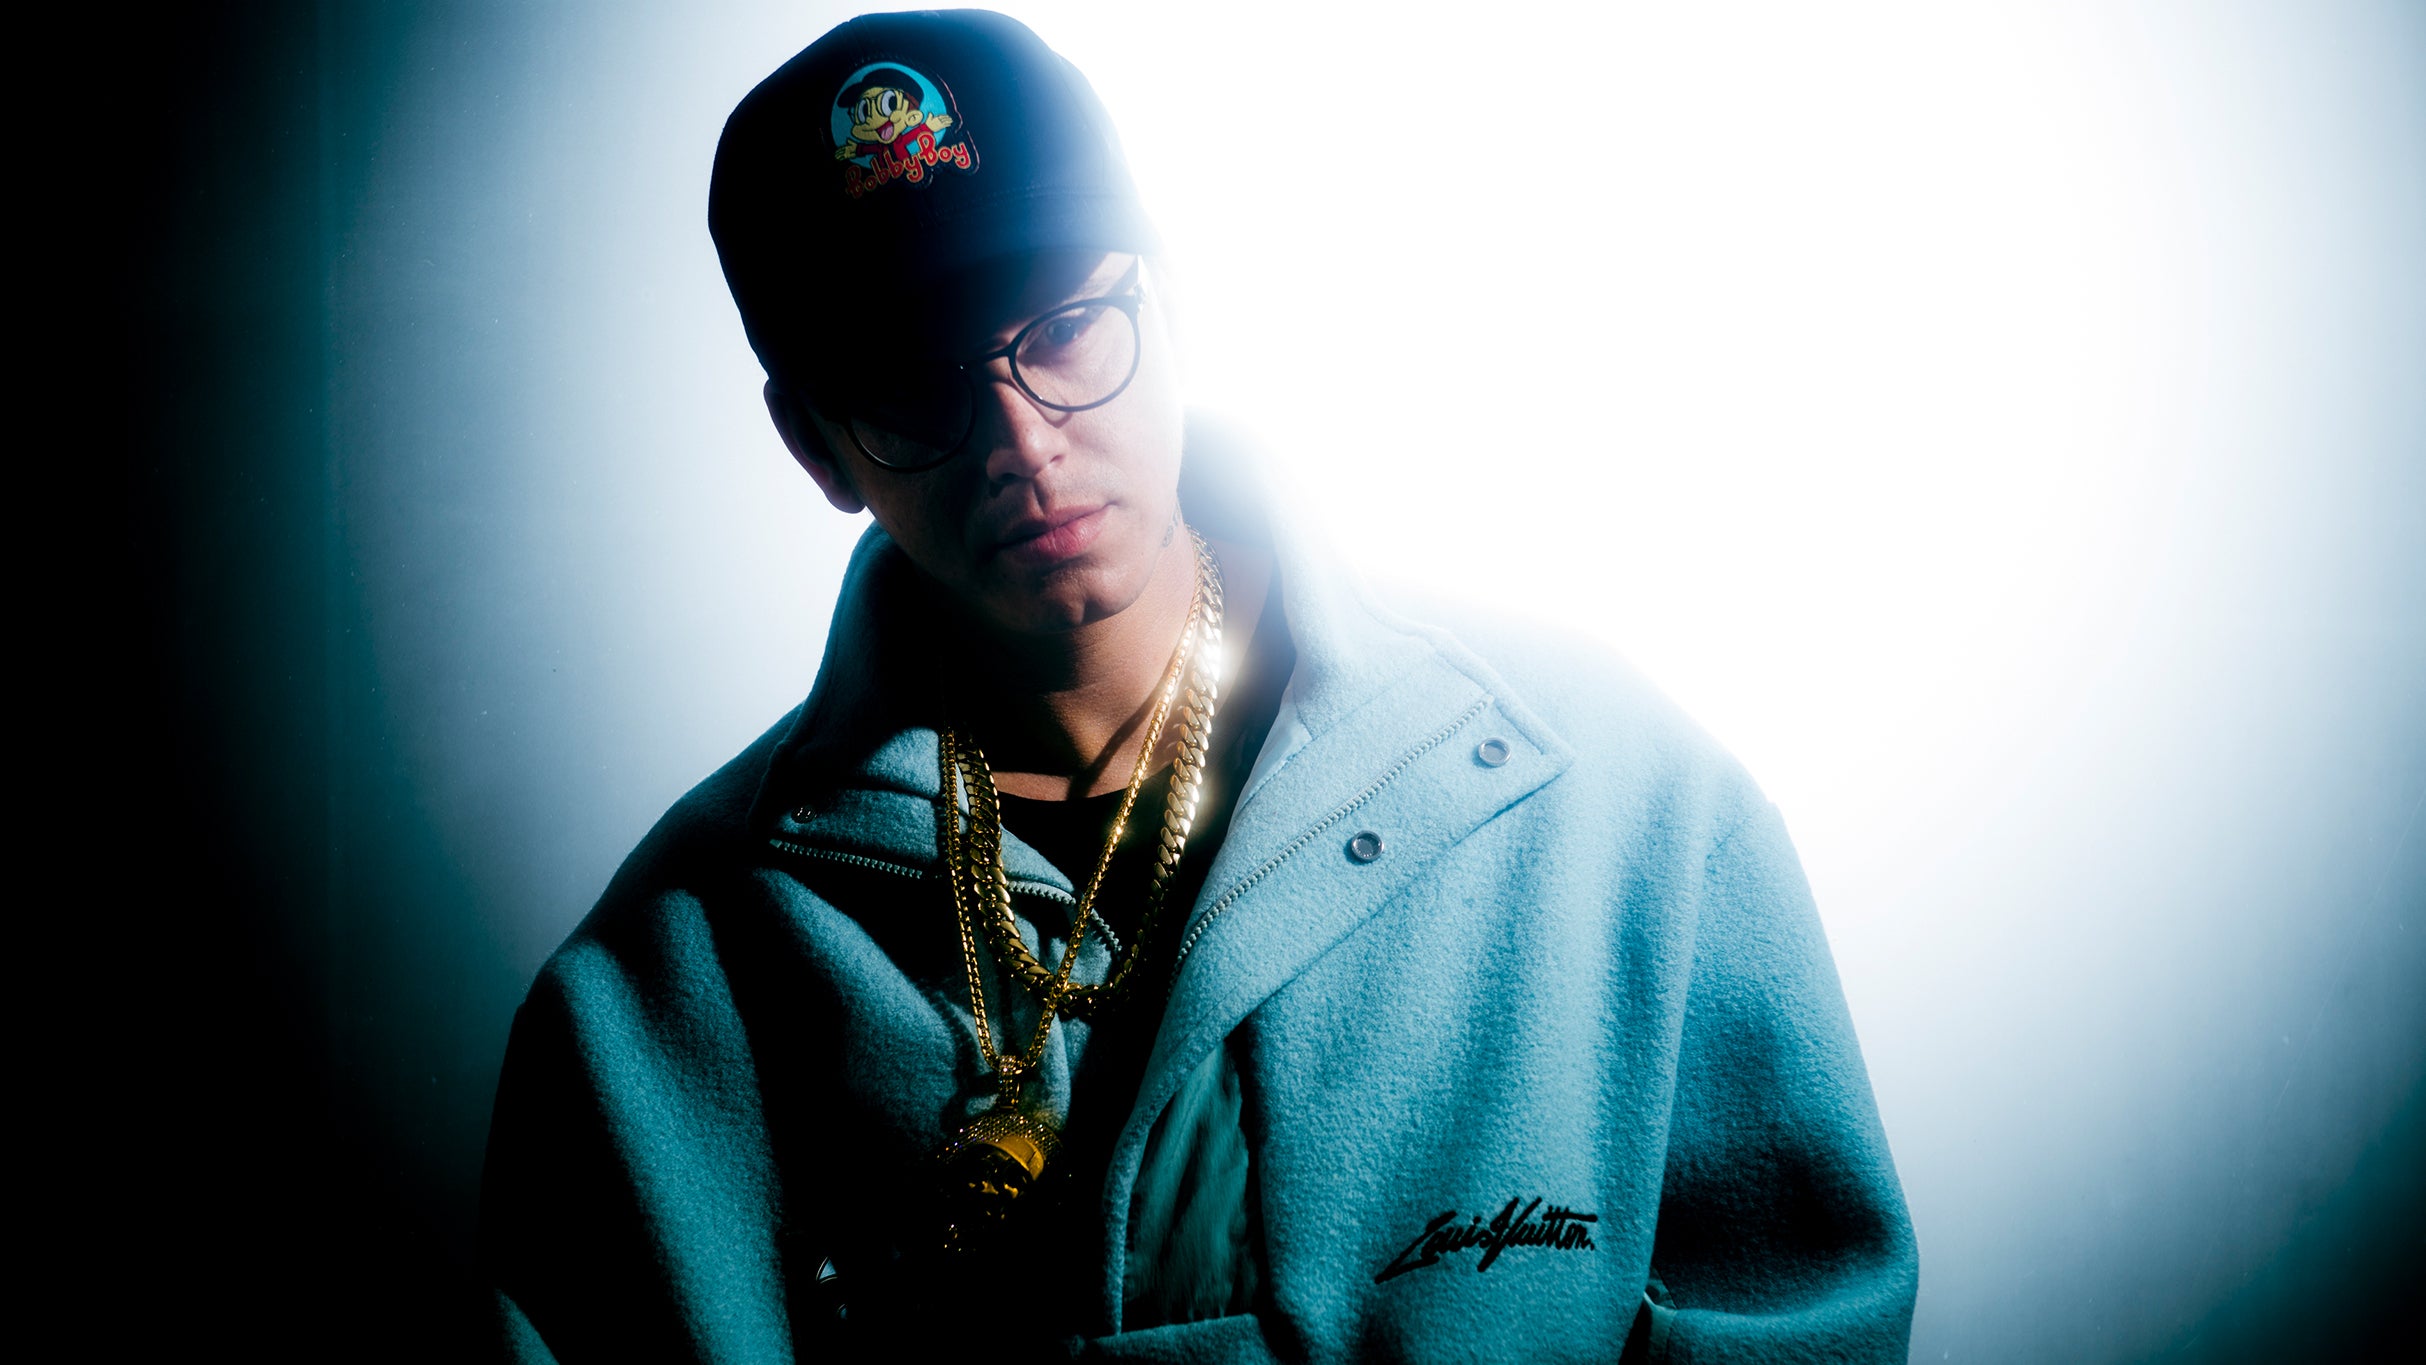 Logic: The College Park Tour with special guest Juicy J free pre-sale code for early tickets in Detroit